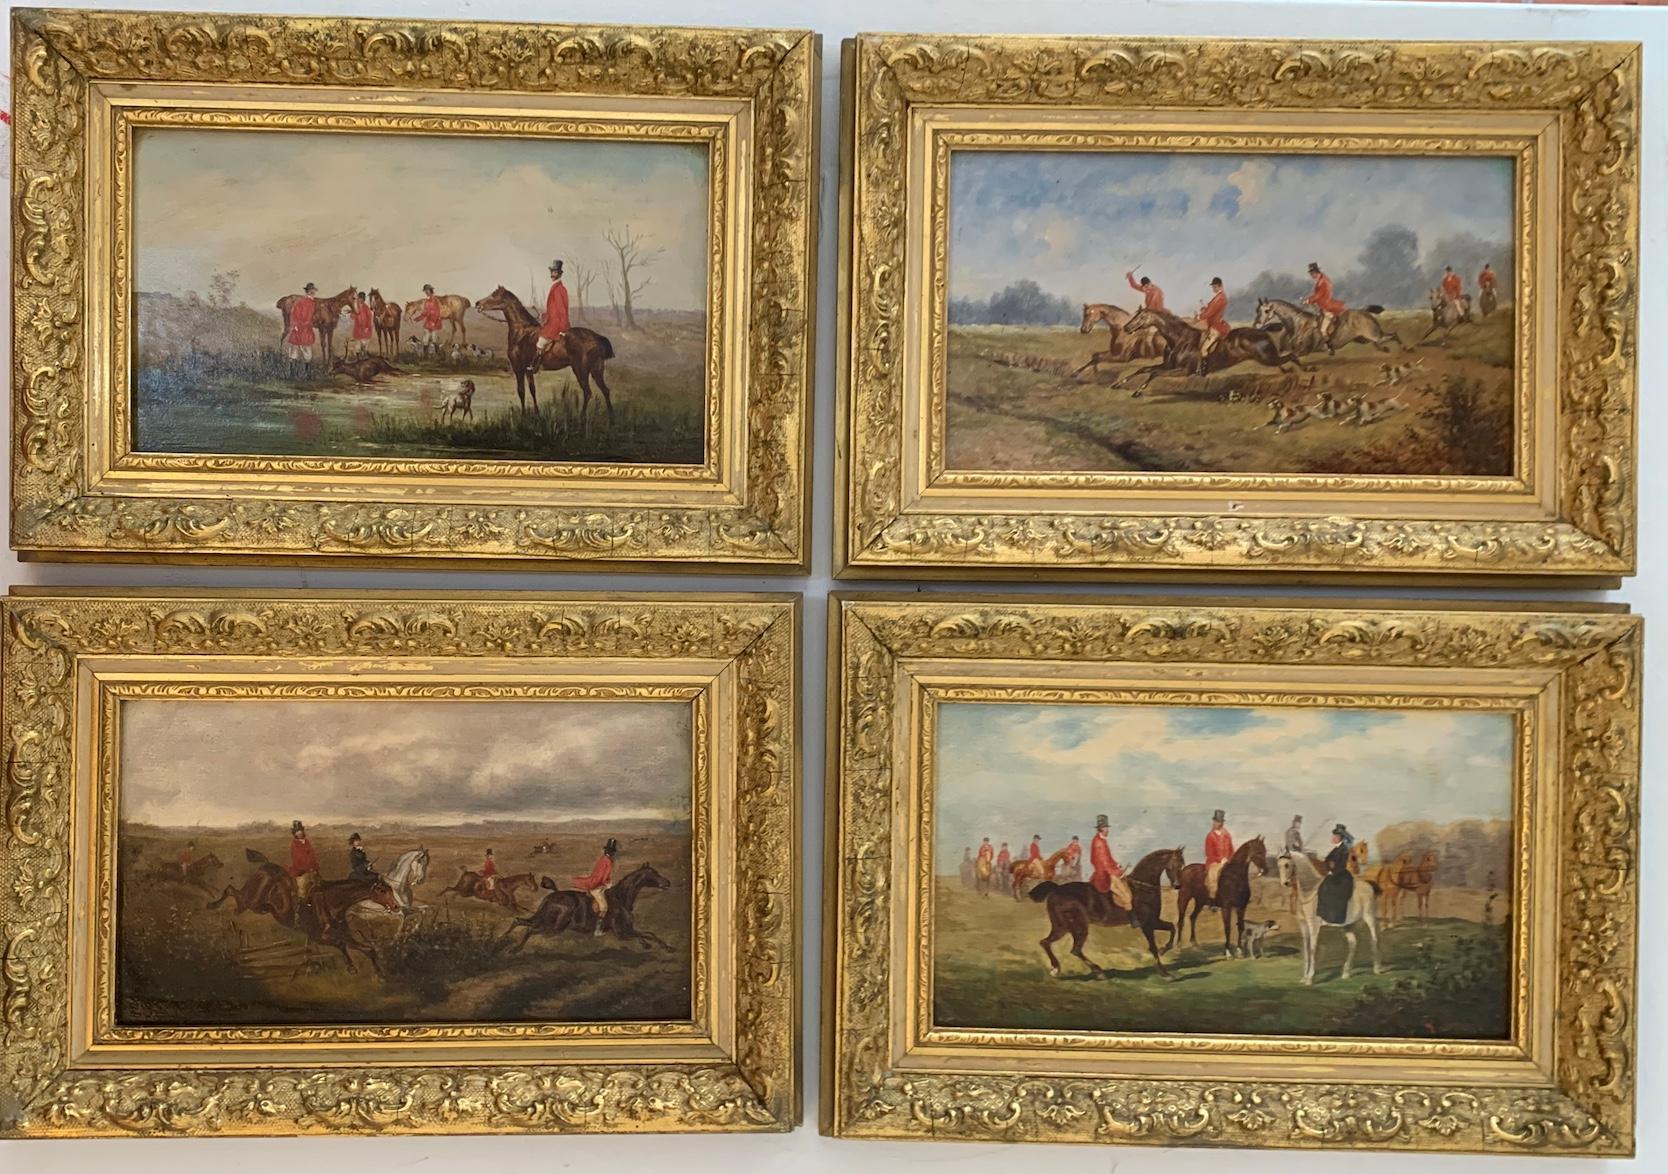 Rudolph Stone Landscape Painting - 19th century Set of 4 Fox hunting scenes in a landscape, with hounds, huntsmen